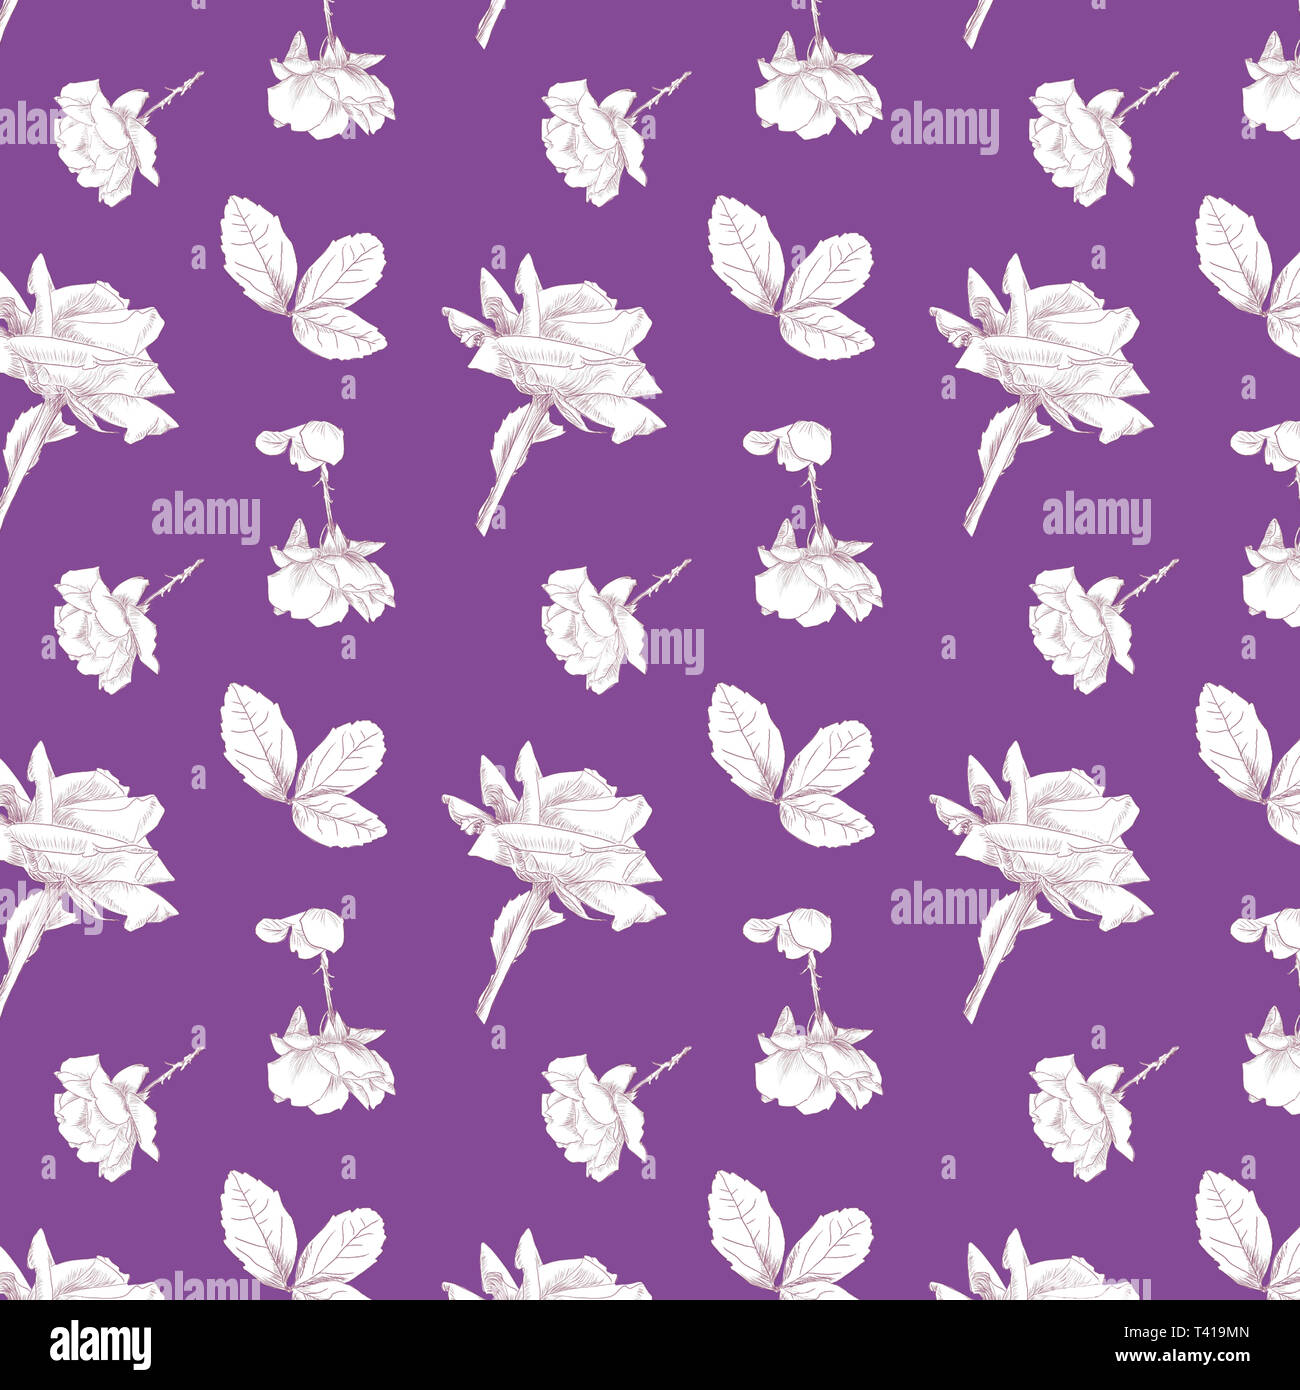 Pattern of hand drawn roses in white with a berry colored background 1500x1500 repeat  by jziprian Stock Photo